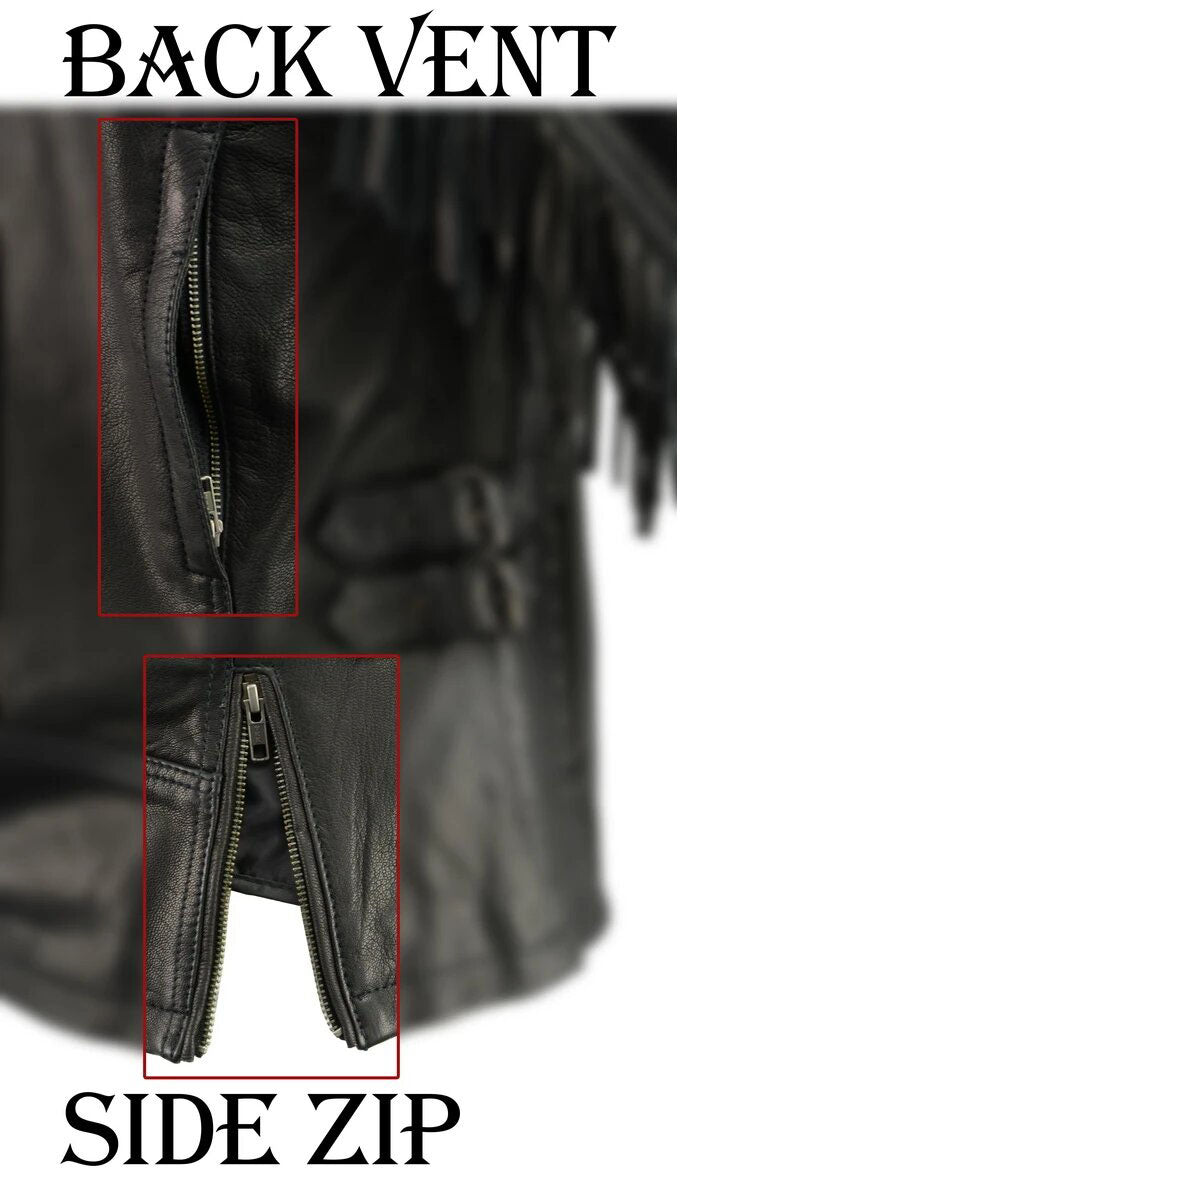 Women's Lightweight Fringed Black Leather Racer Jacket with Dual Gun Pockets